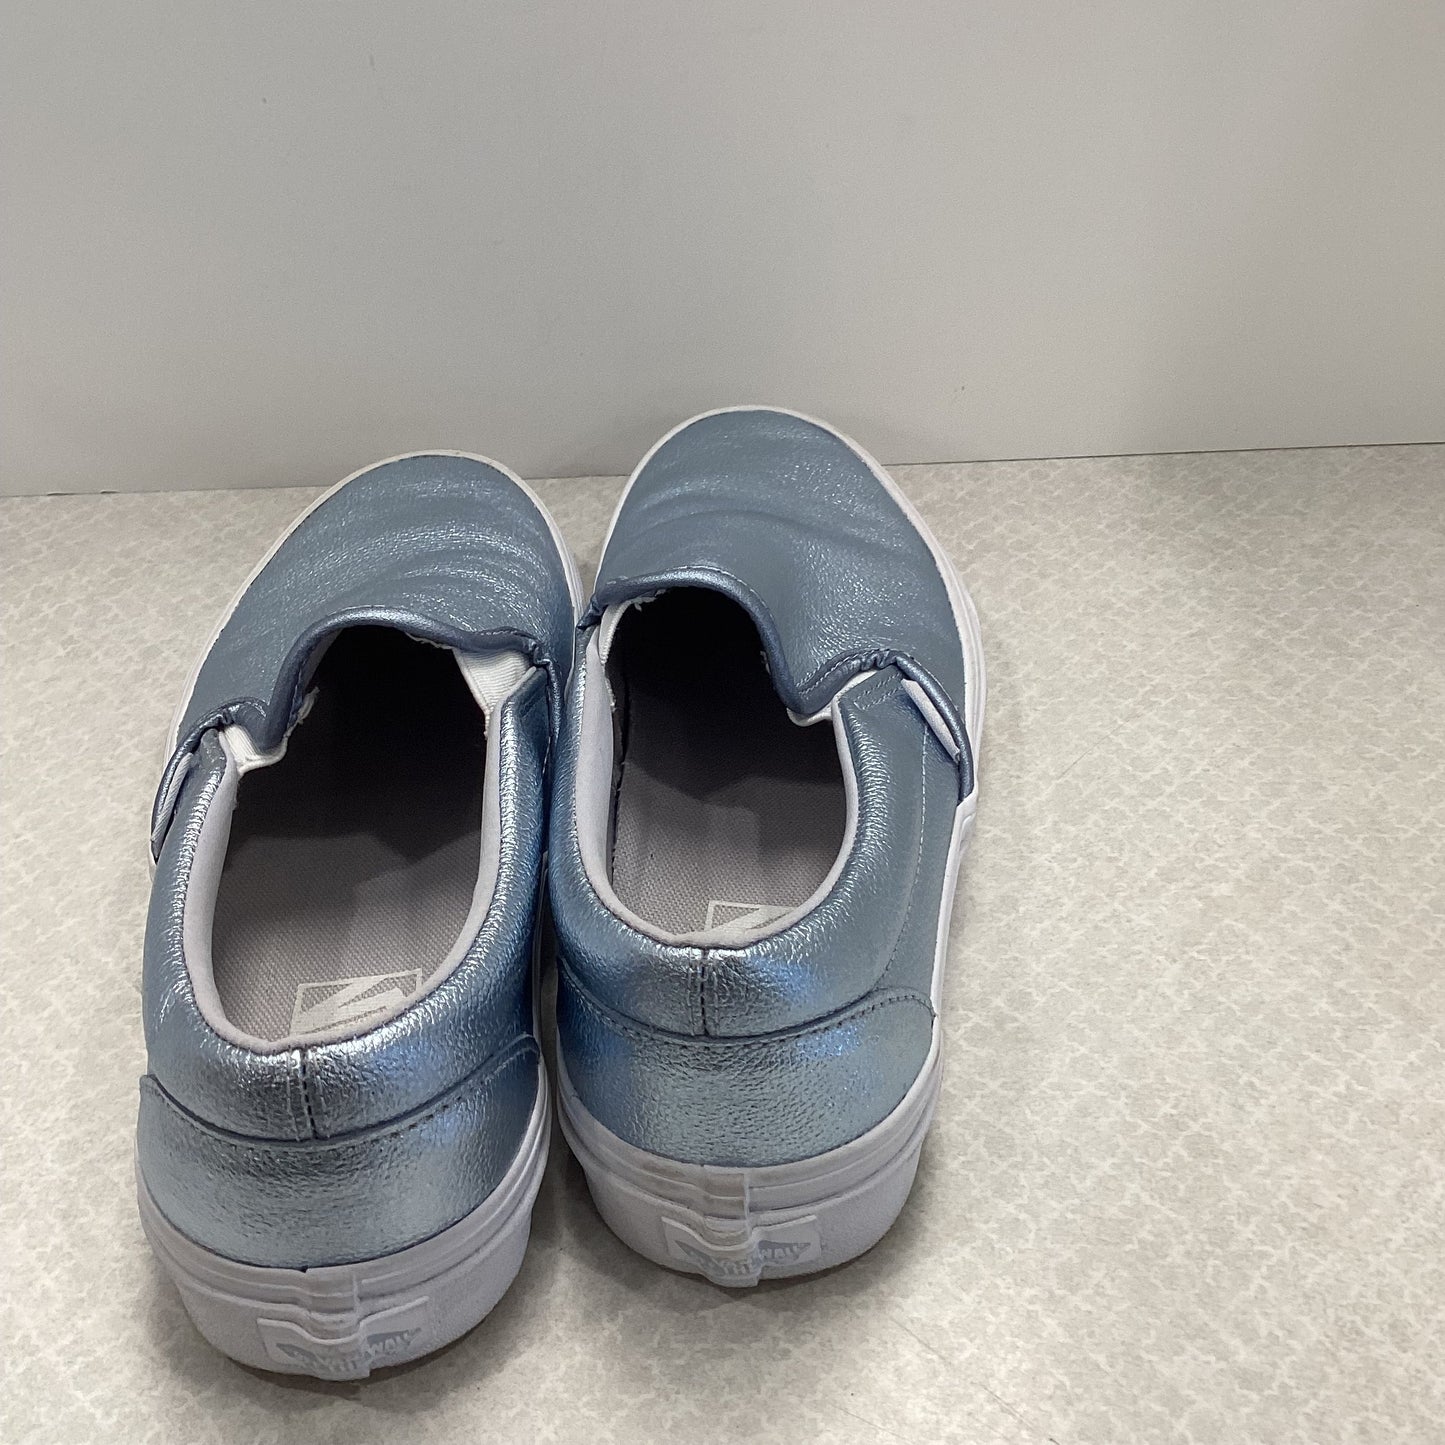 Silver Shoes Sneakers Vans, Size 8.5